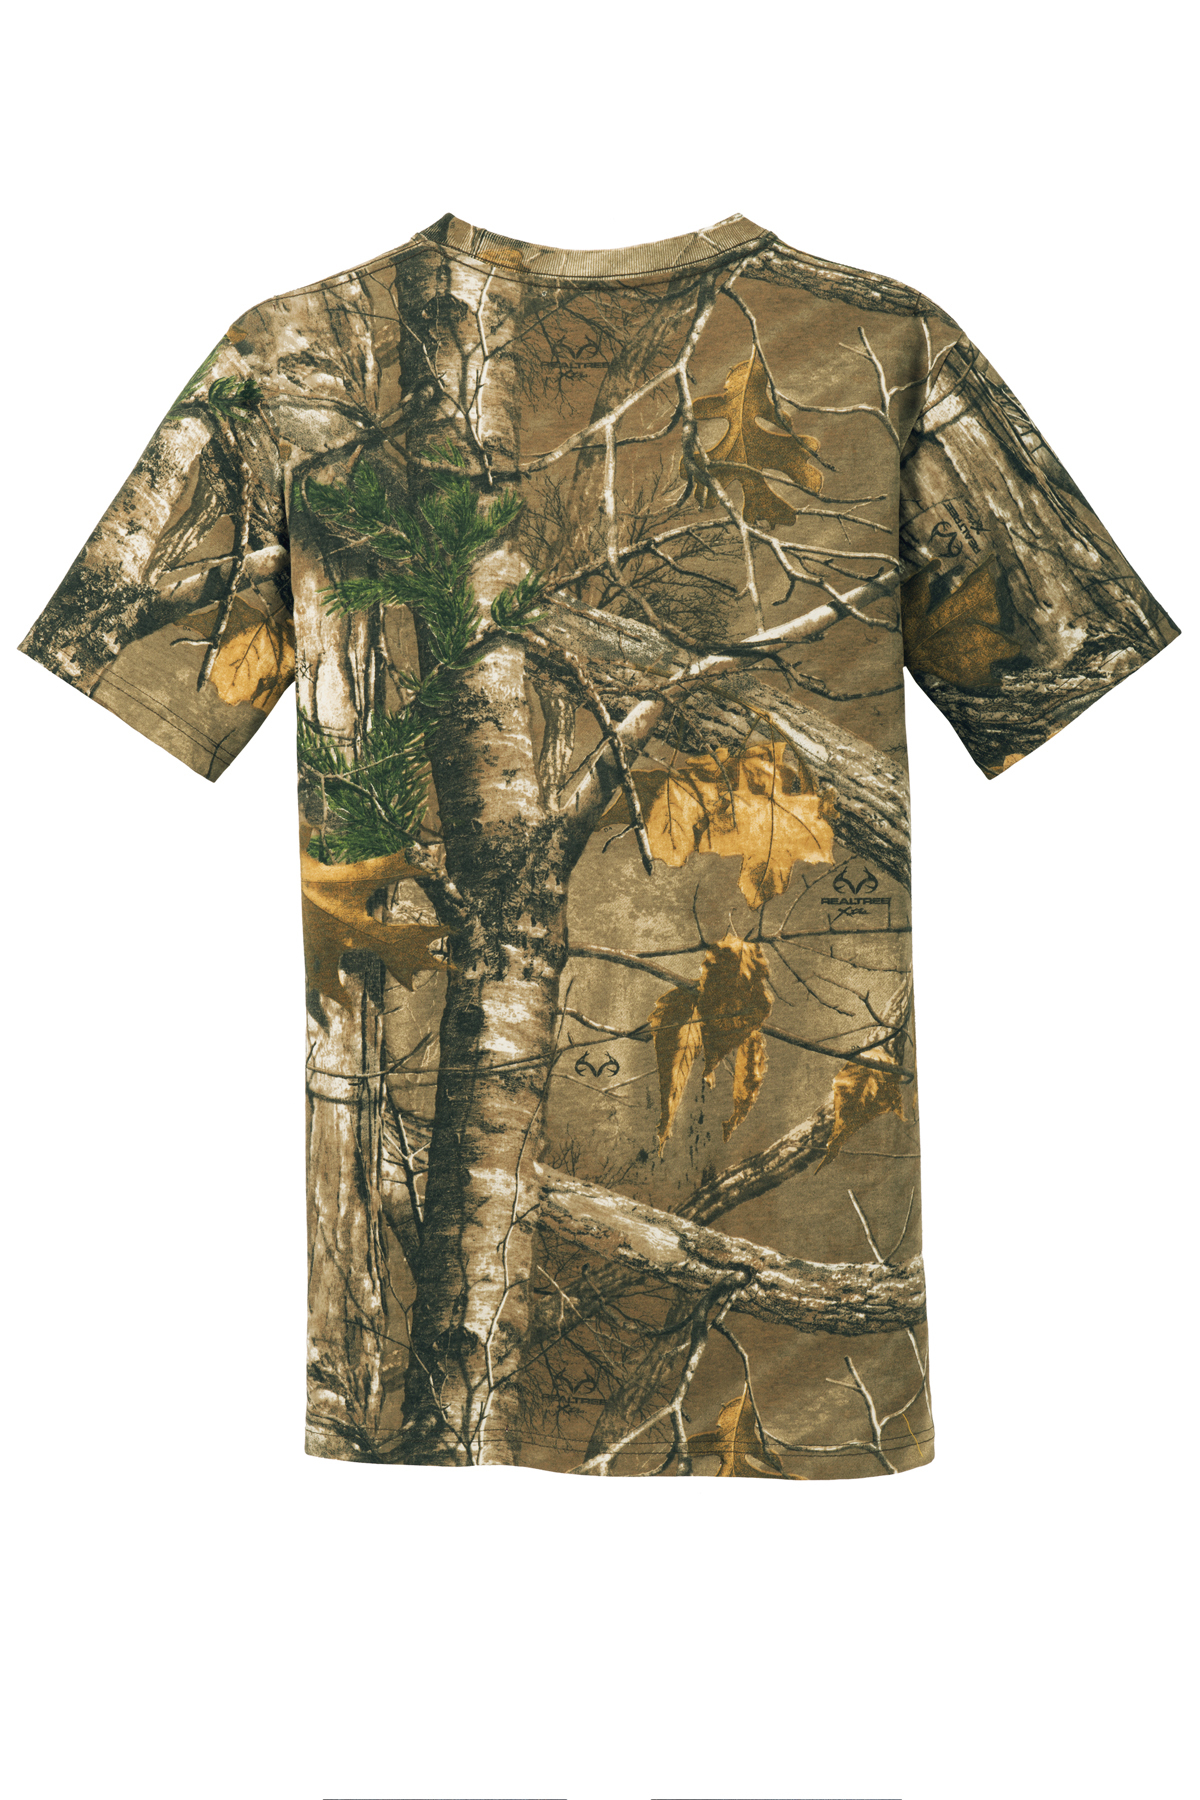 Russell Outdoors Mens Realtree AP Camo Hooded Sweatshirt Size S-3XL NEW  S459R